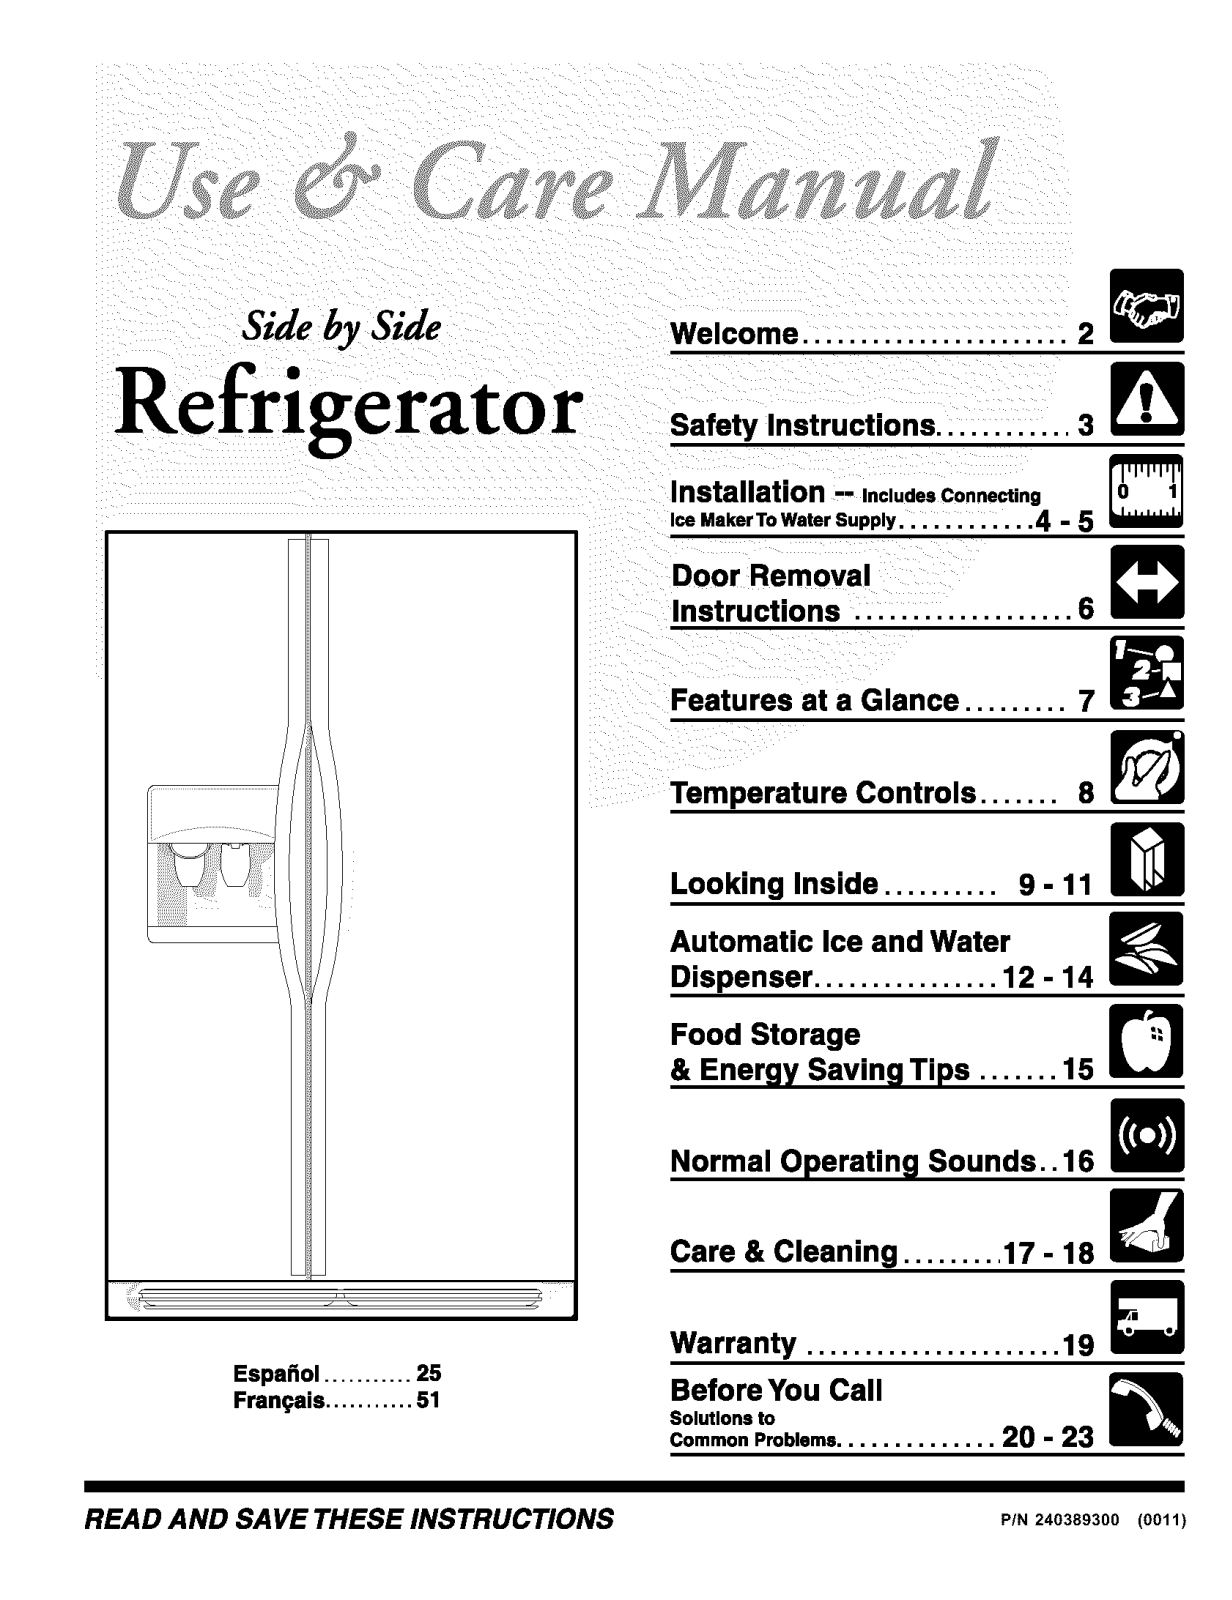 Frigidaire FRS26KW3AW1, FRS26KW3AW0, FRS26KW3AQ1, FRS26KW3AQ0, FRS26KW3AB1 Owner’s Manual